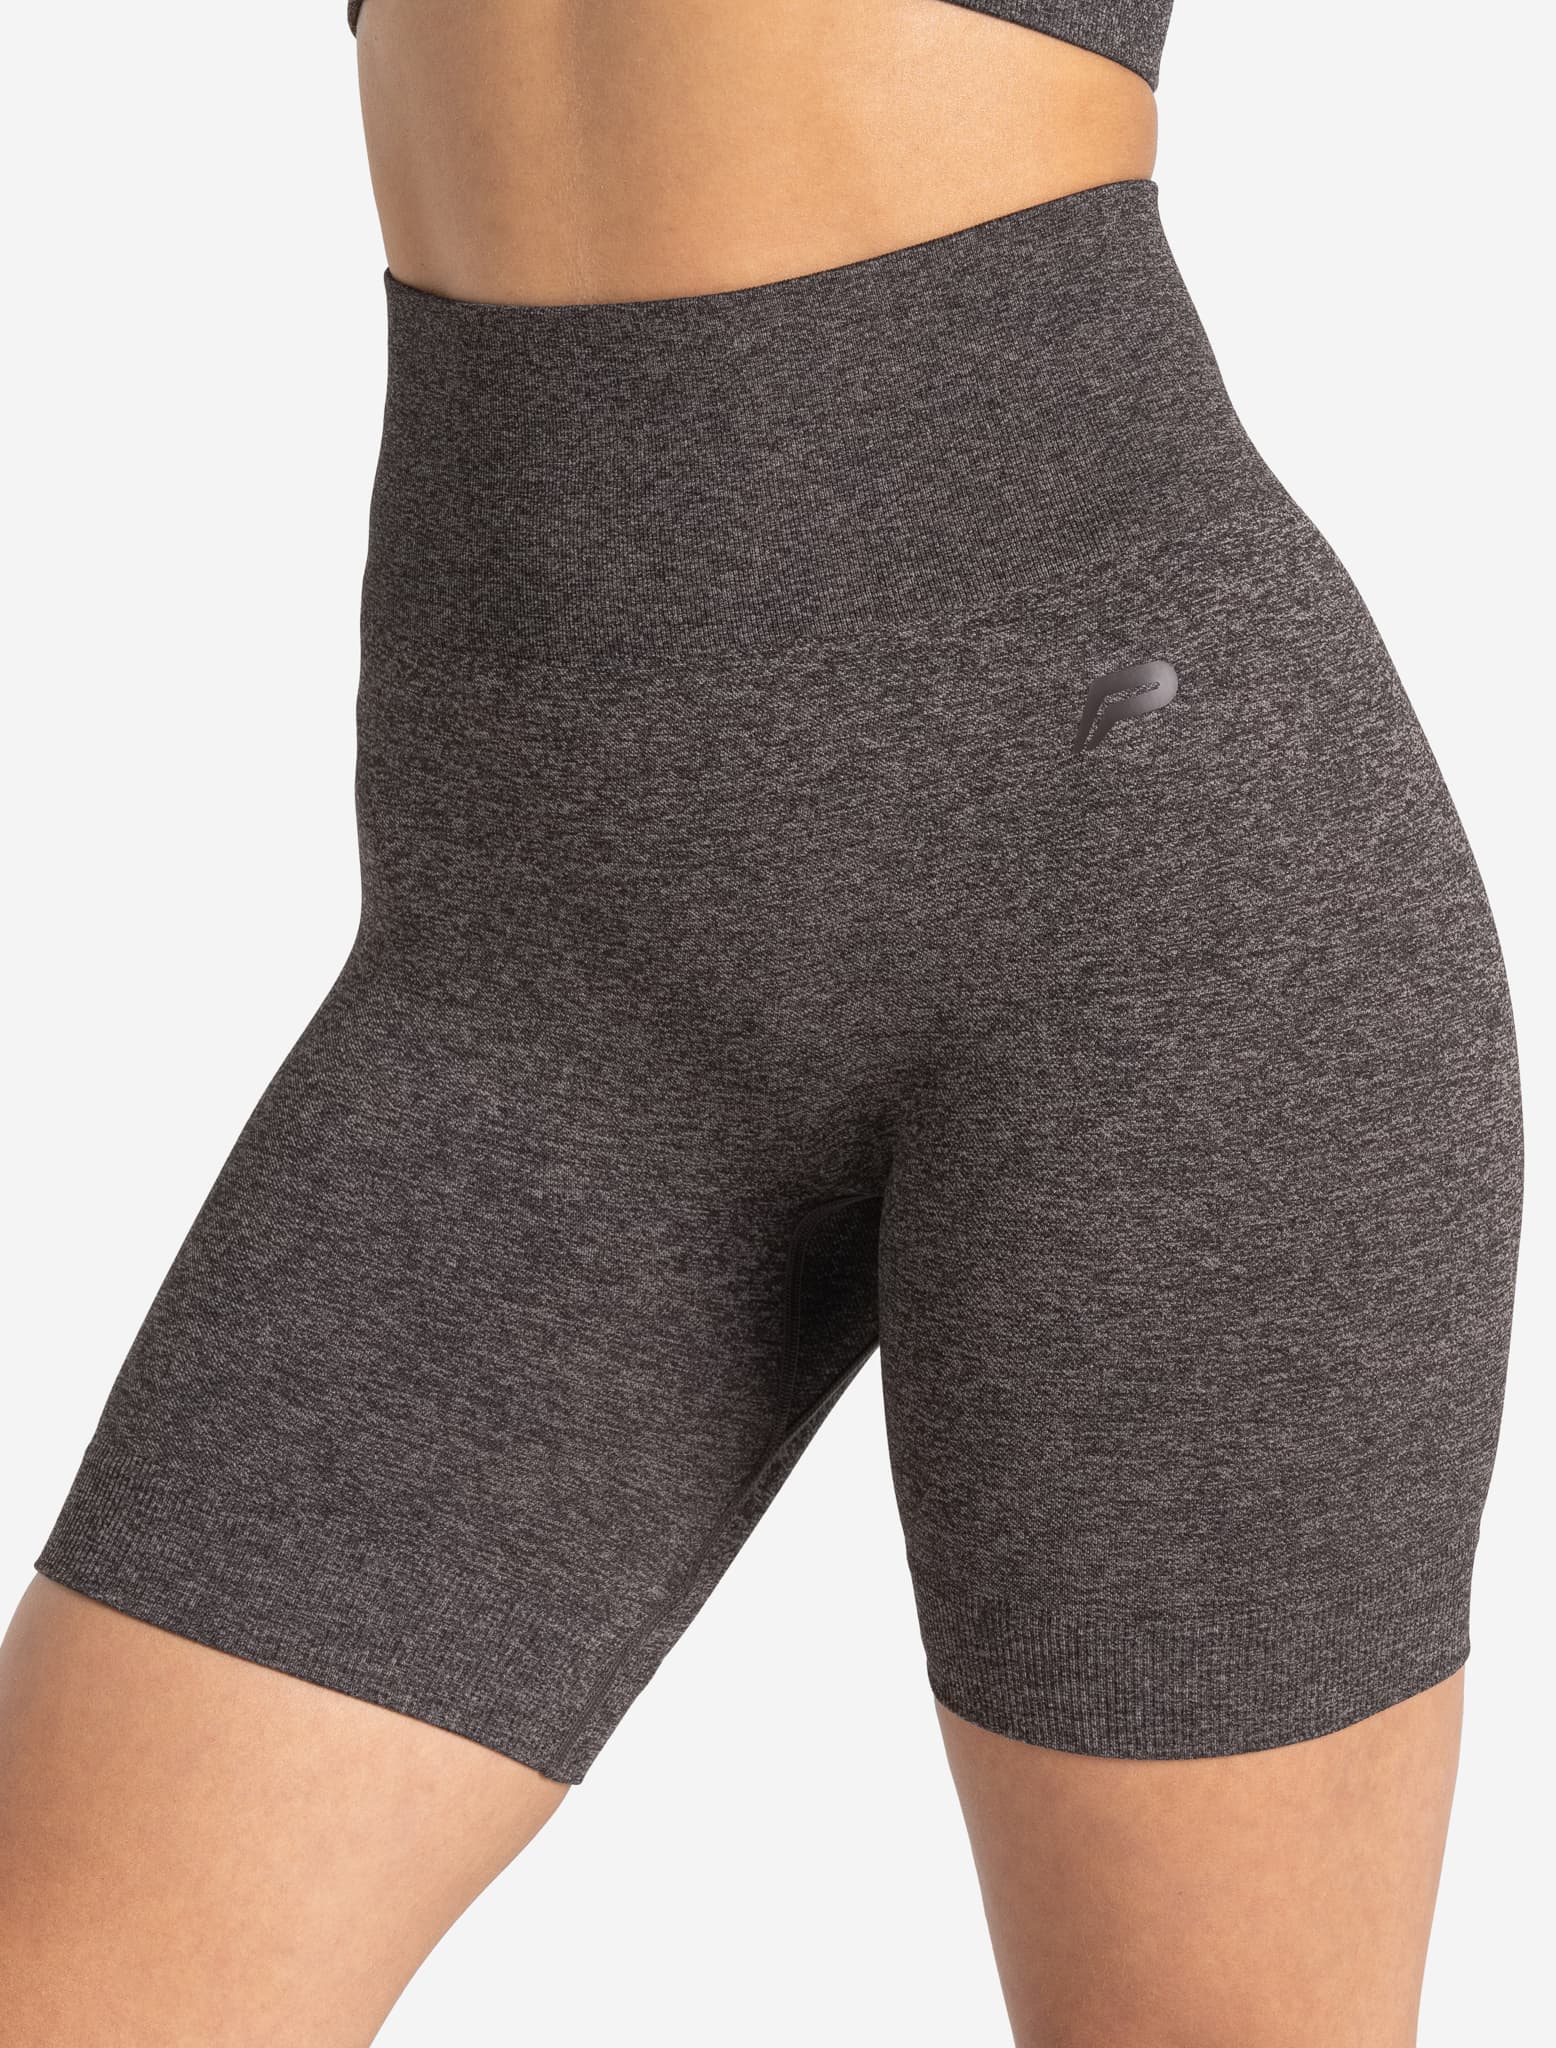 Core Seamless Shorts / Brown Marl Pursue Fitness 2